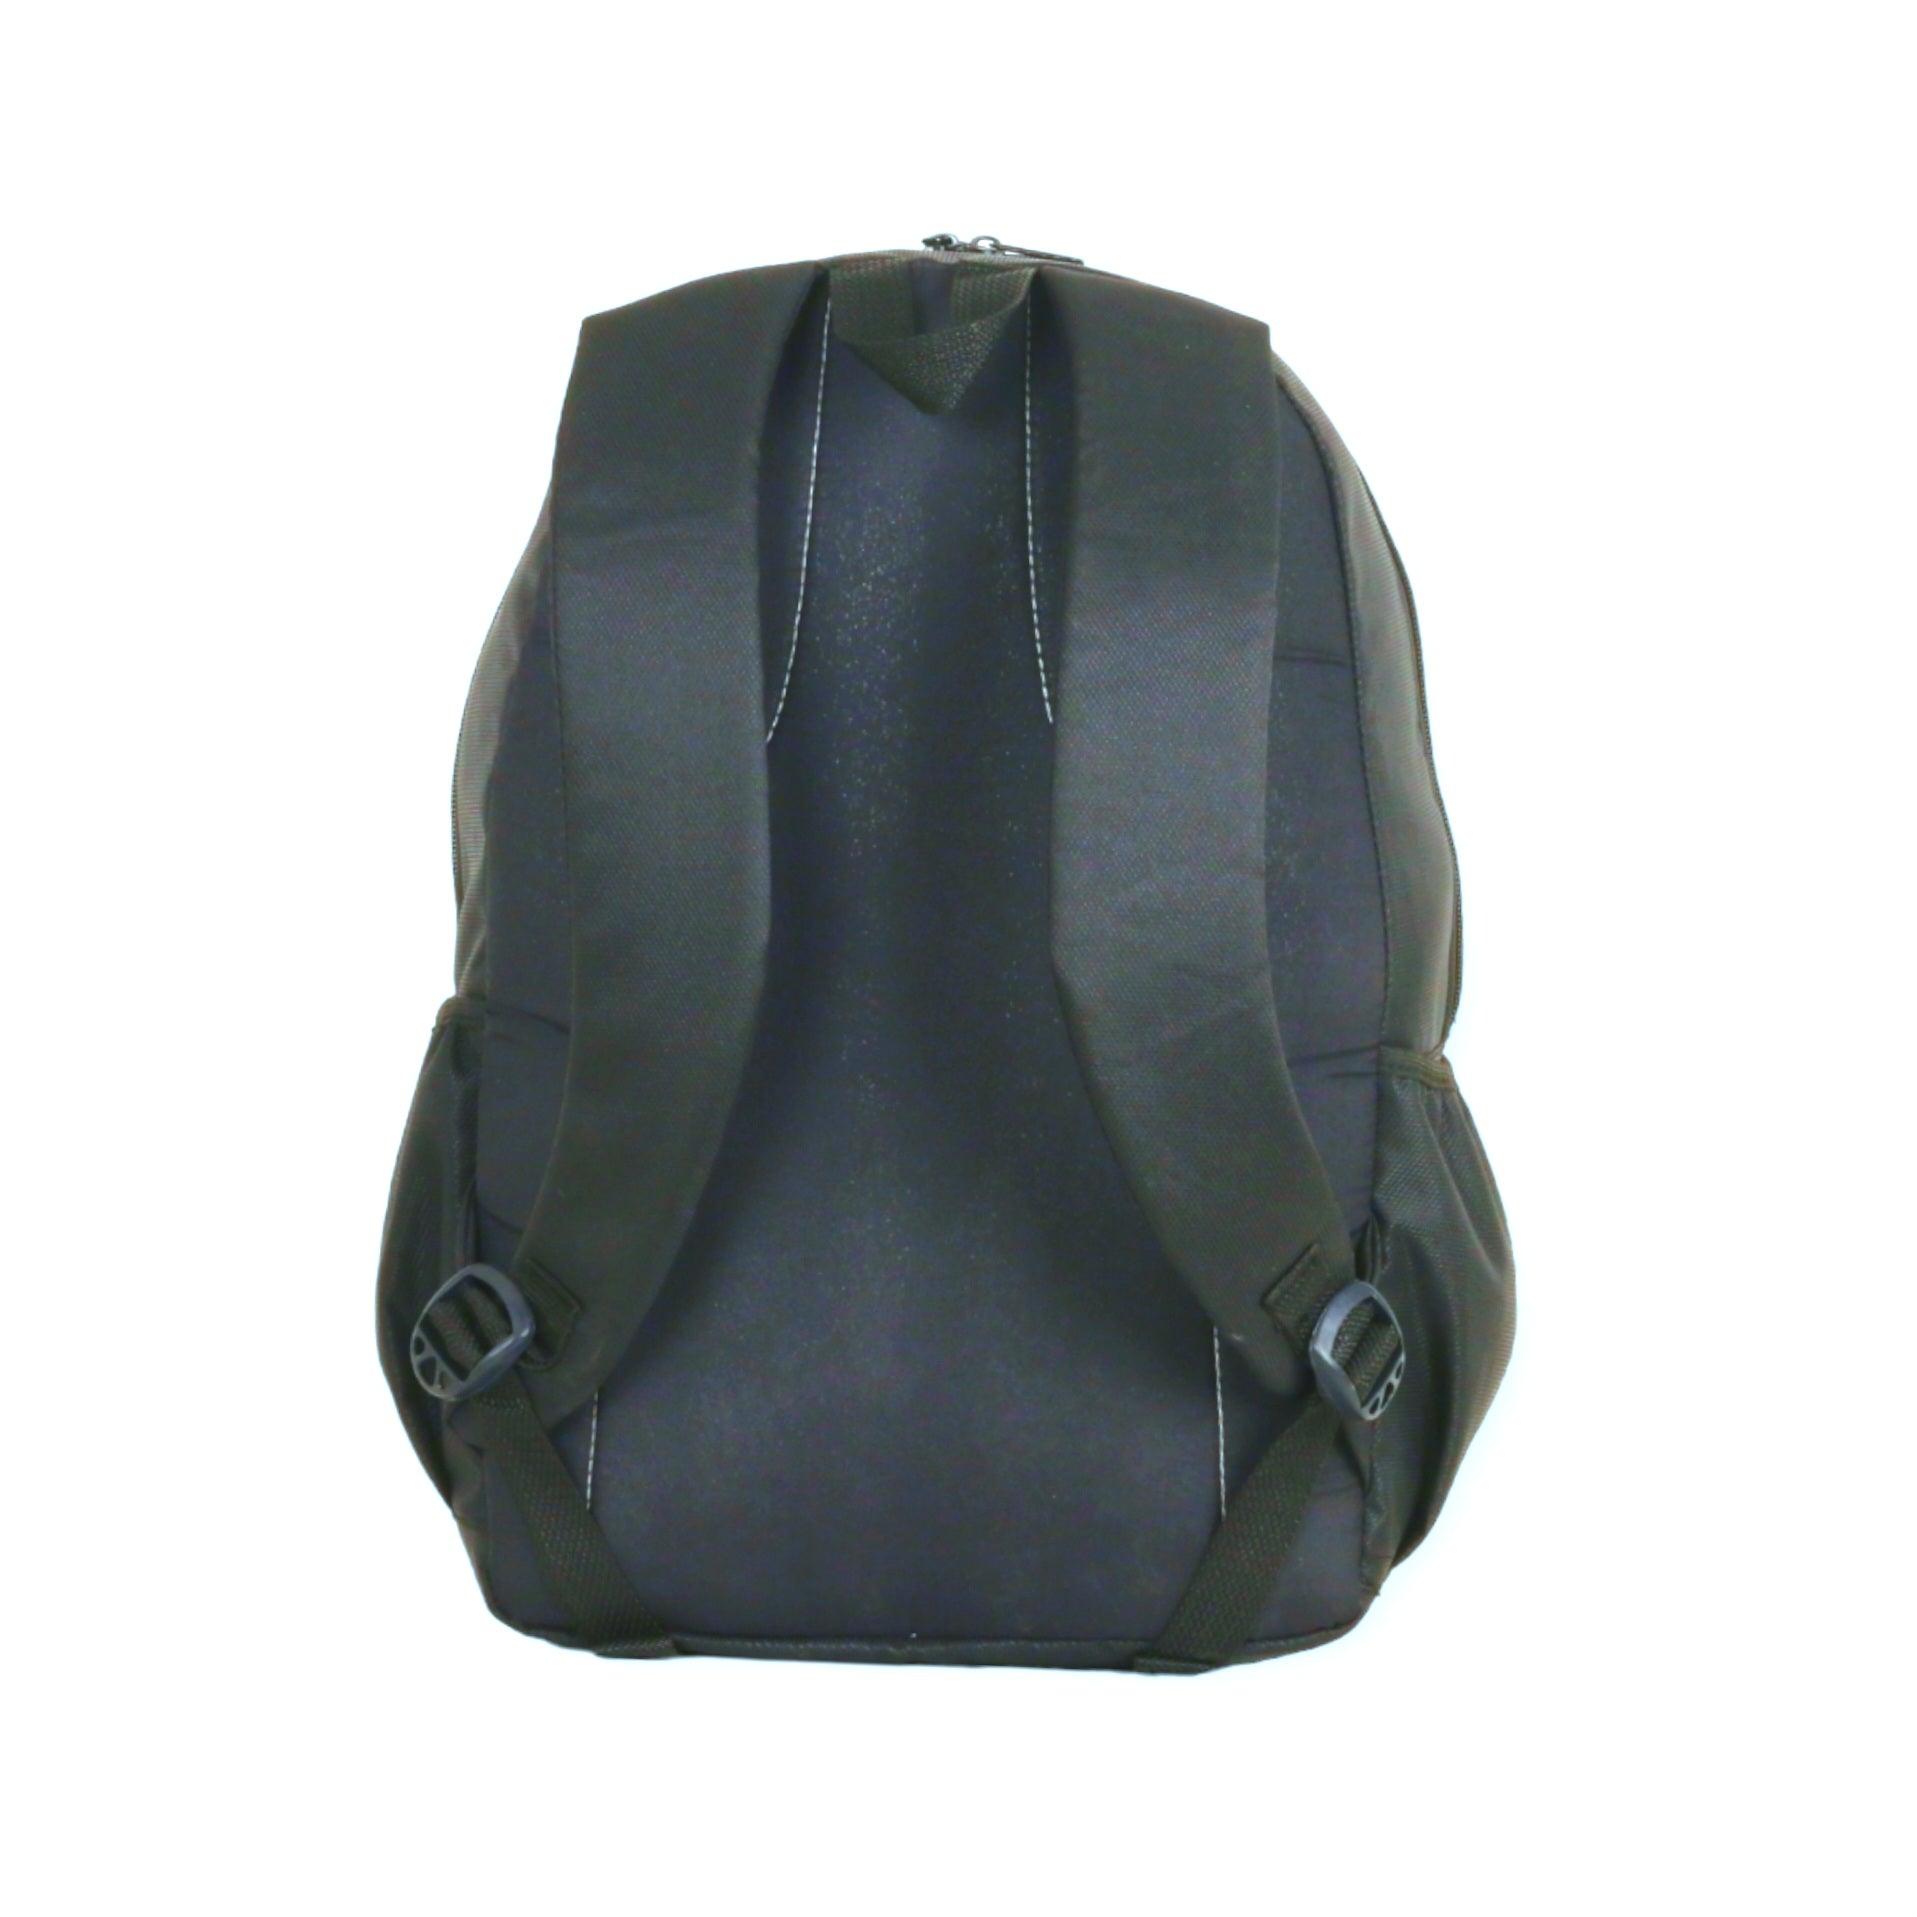 Force laptop 15.6" Backpack-Black - military tactical - FT511 - FORCE STORES